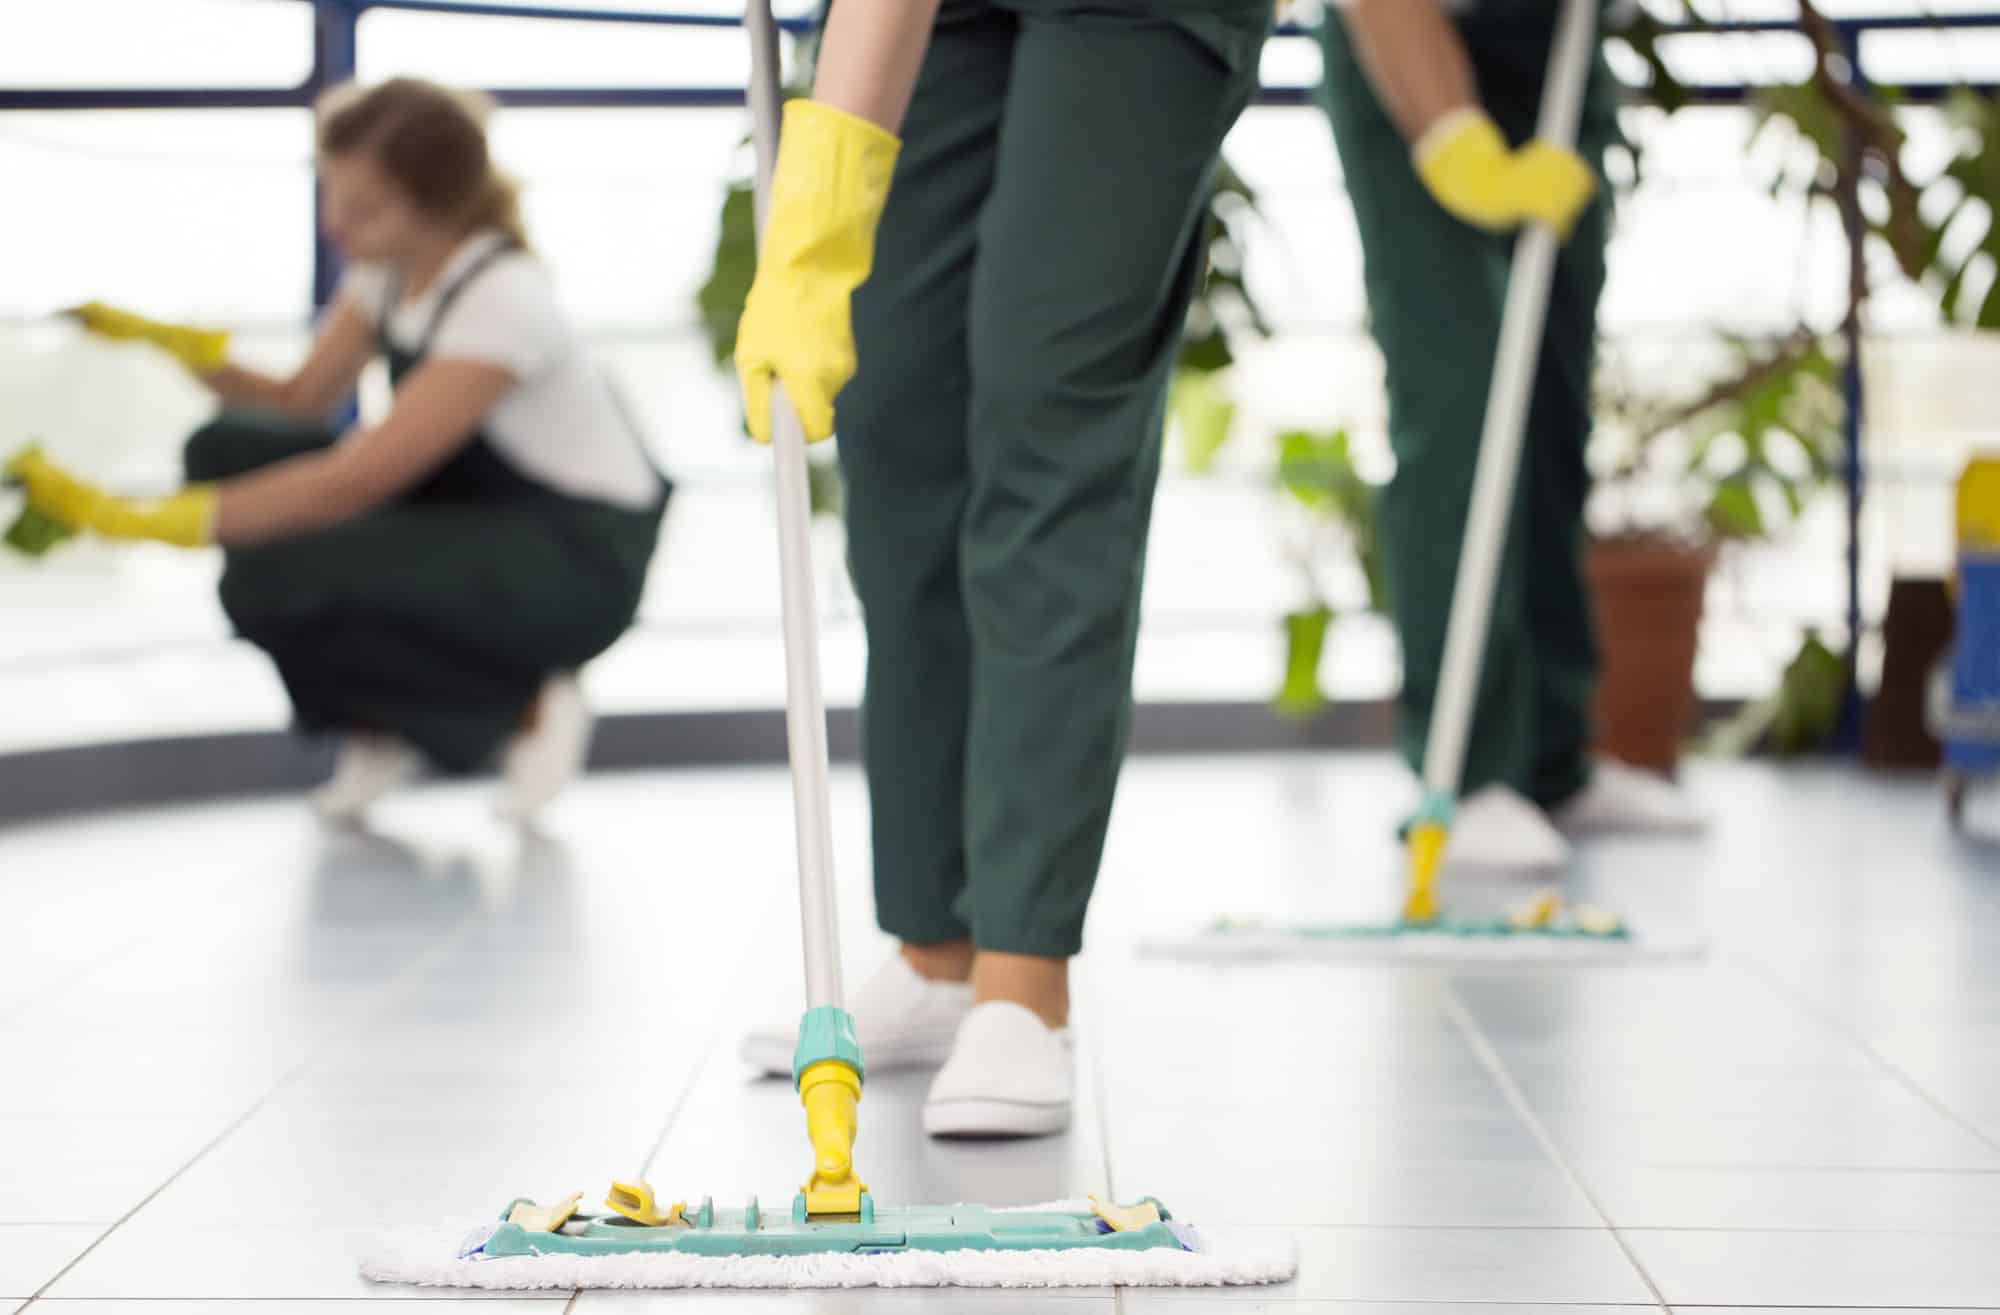 How to Hire Housekeepers